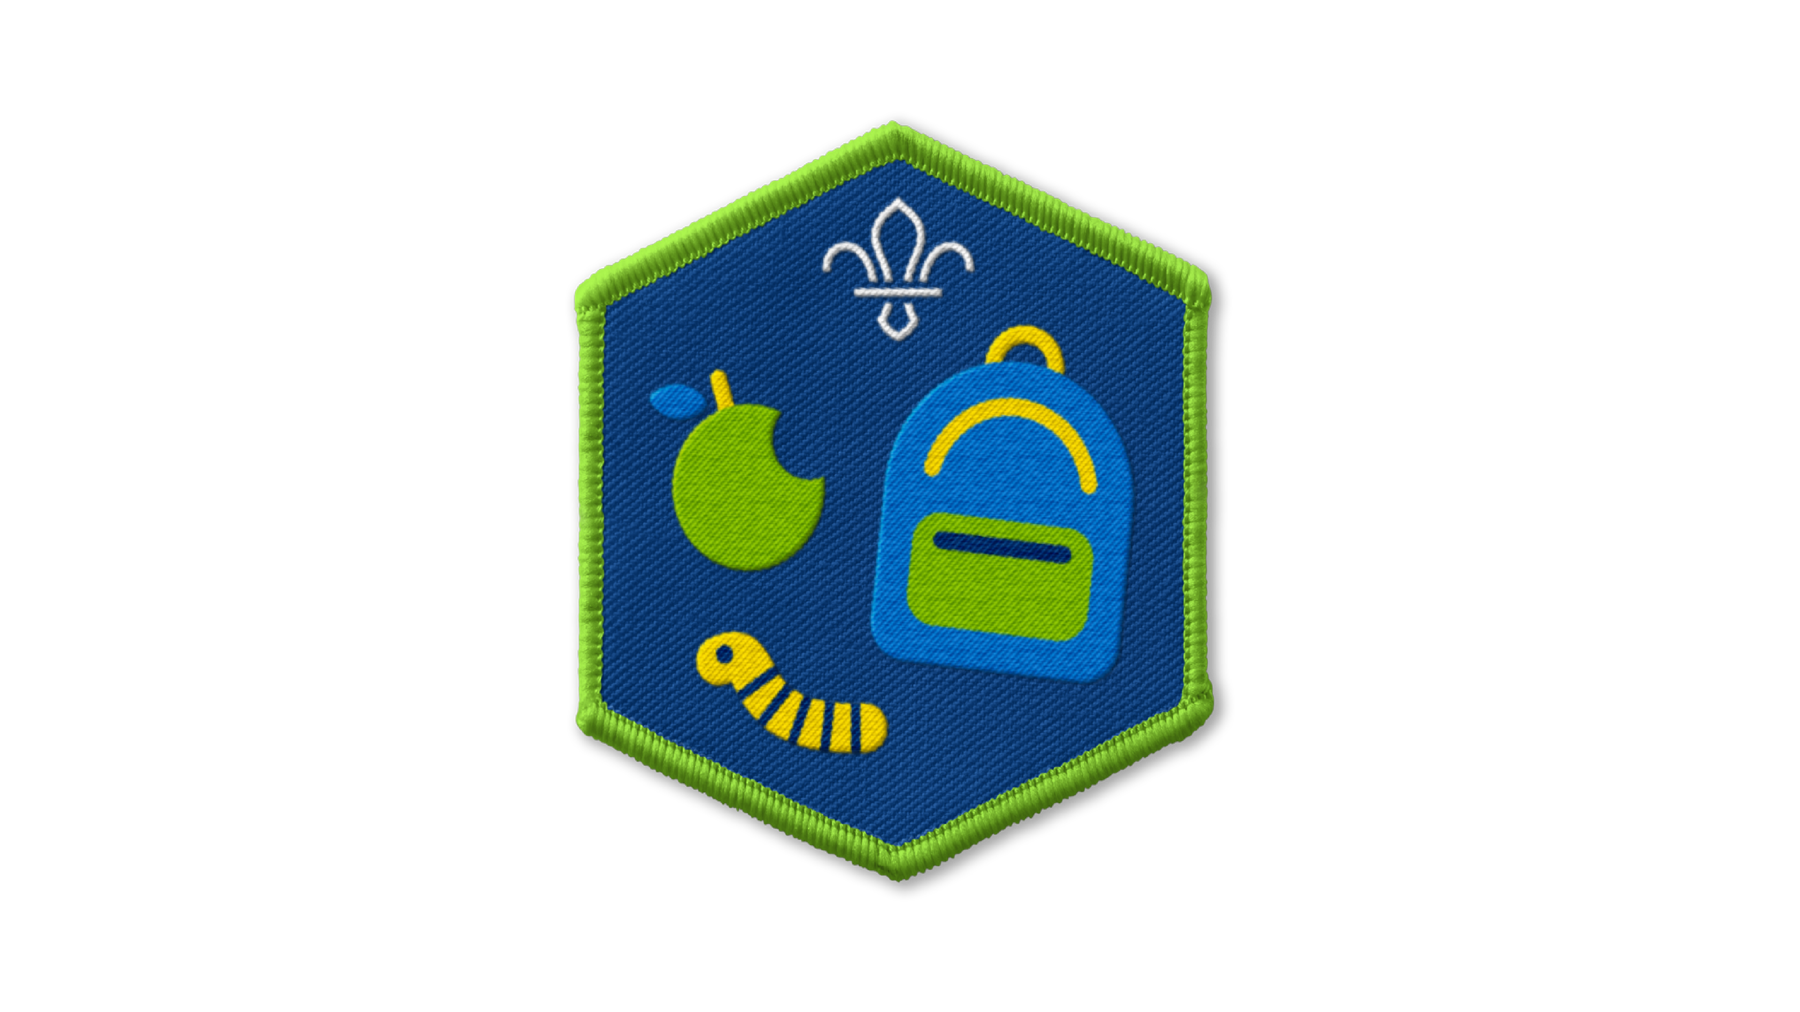 The badge image for the Squirrels All About Adventure Challenge Award.